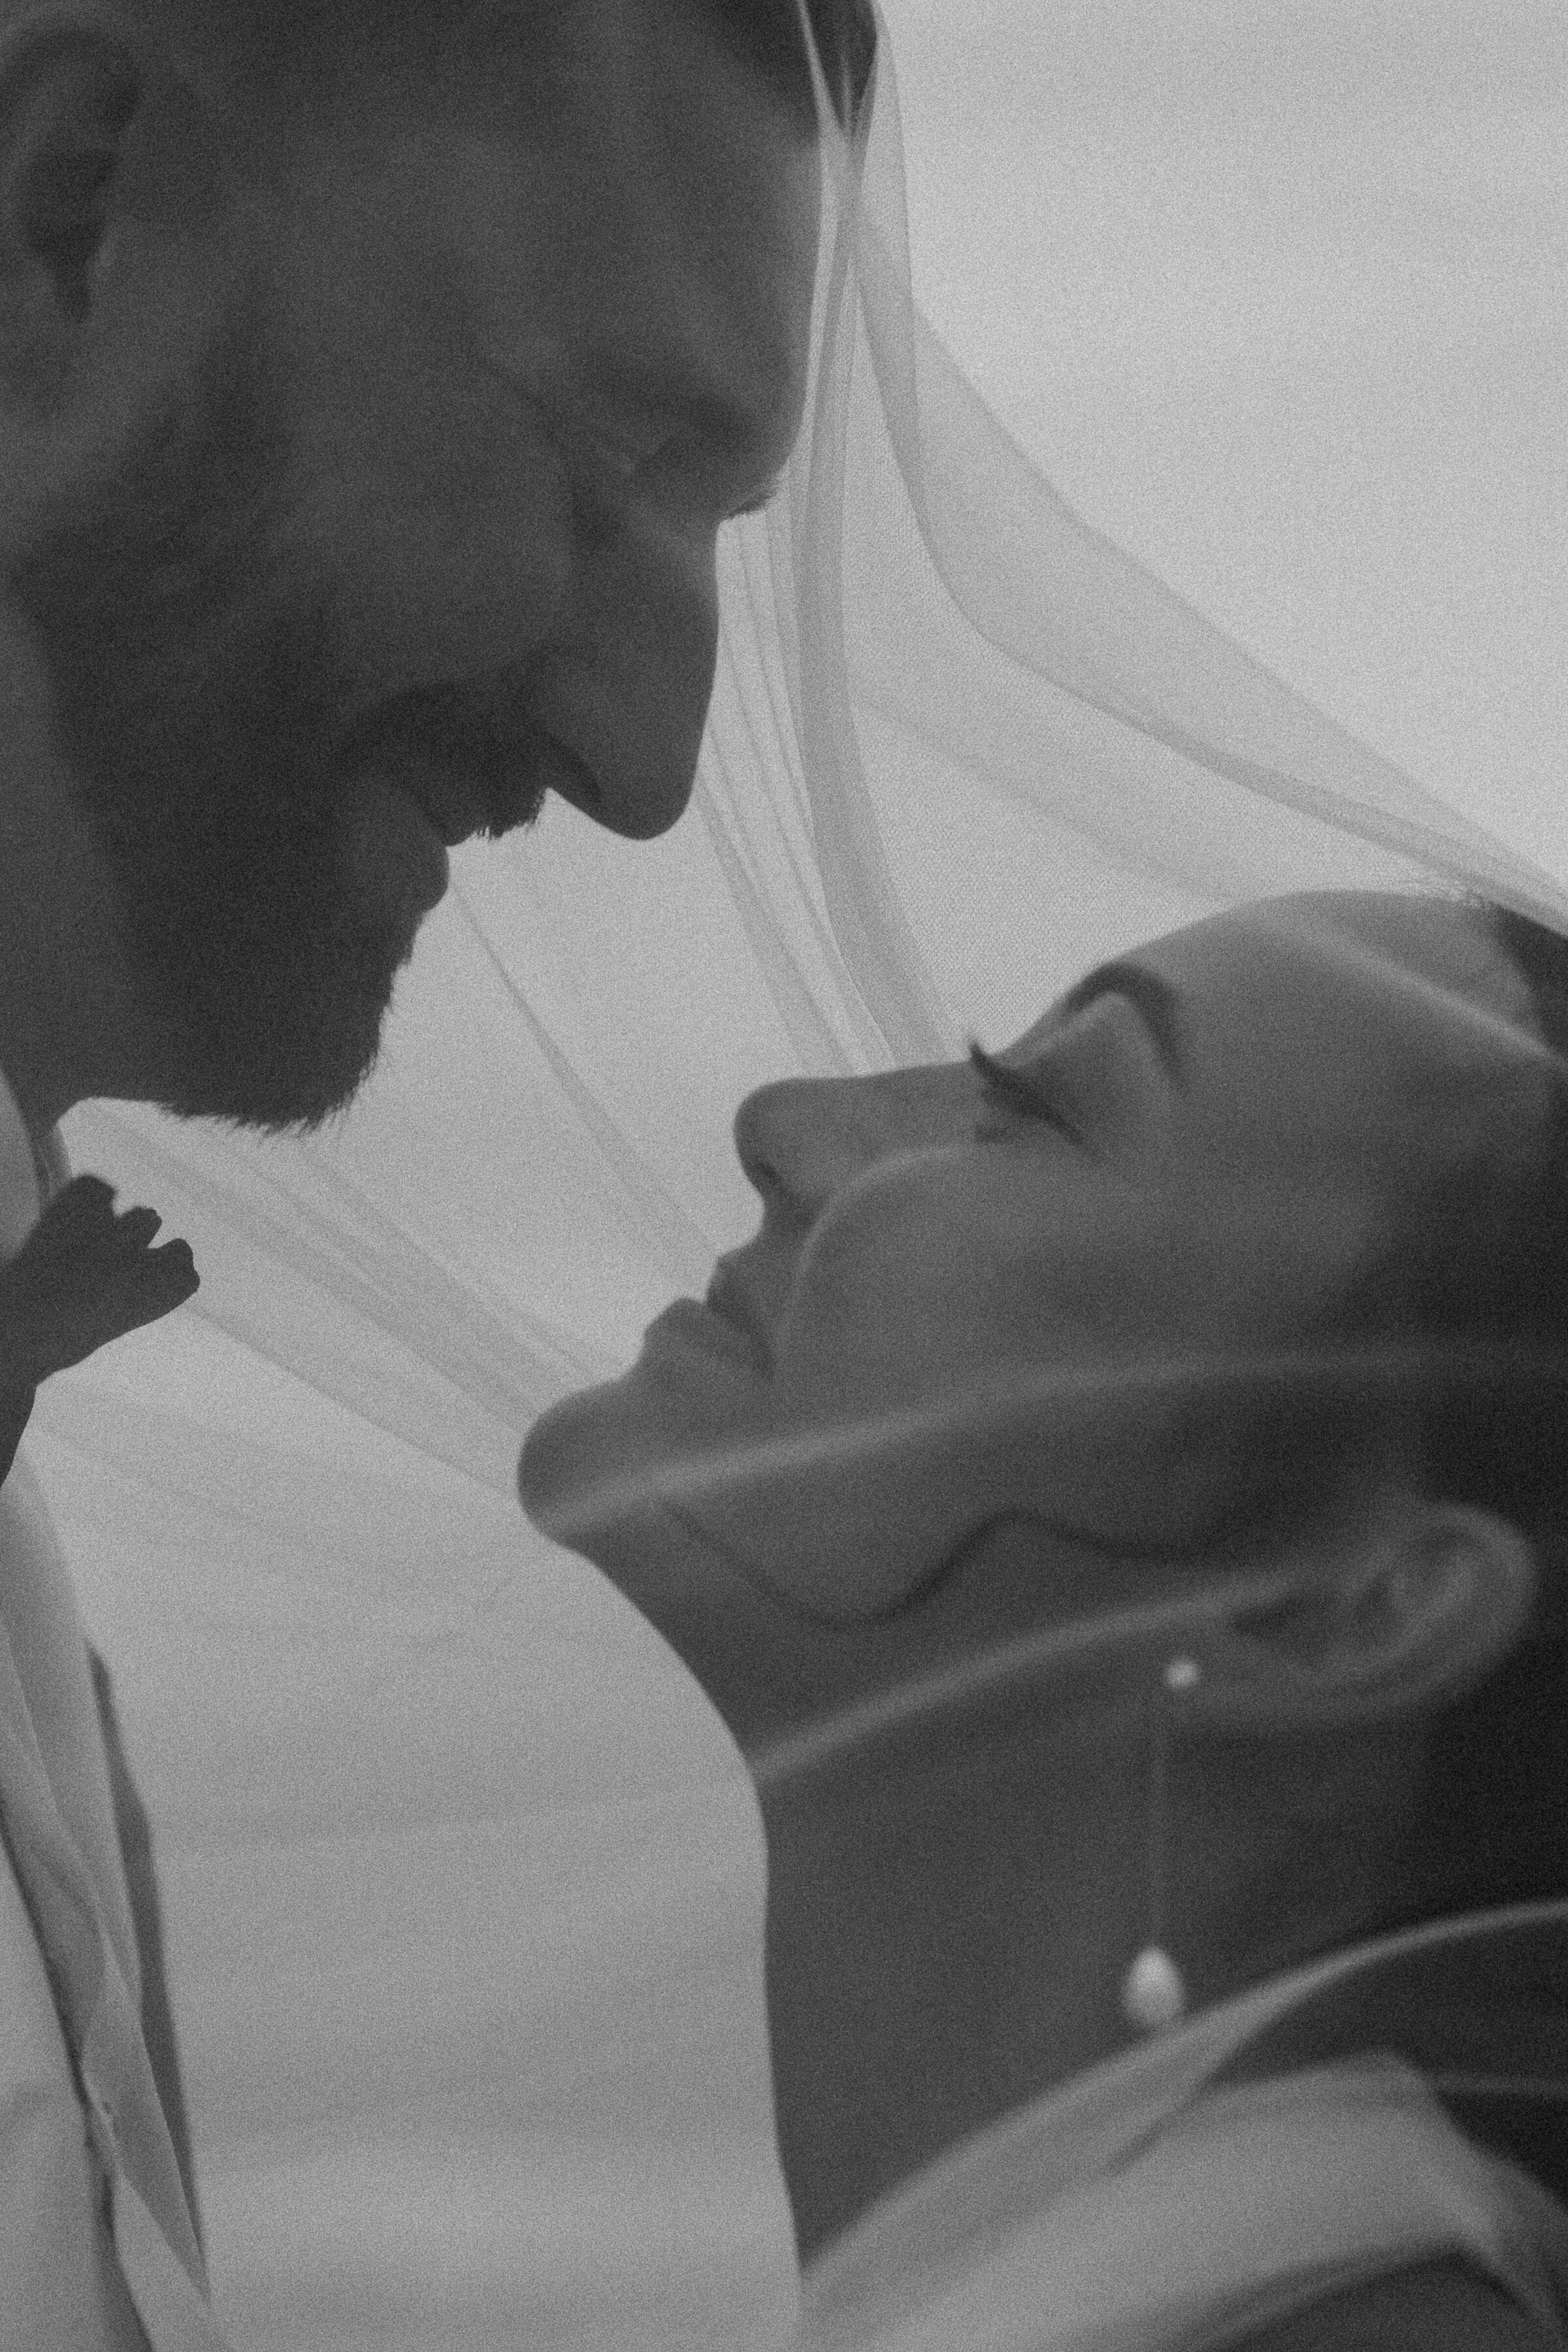 Intimate moment, bride under veil with groom.